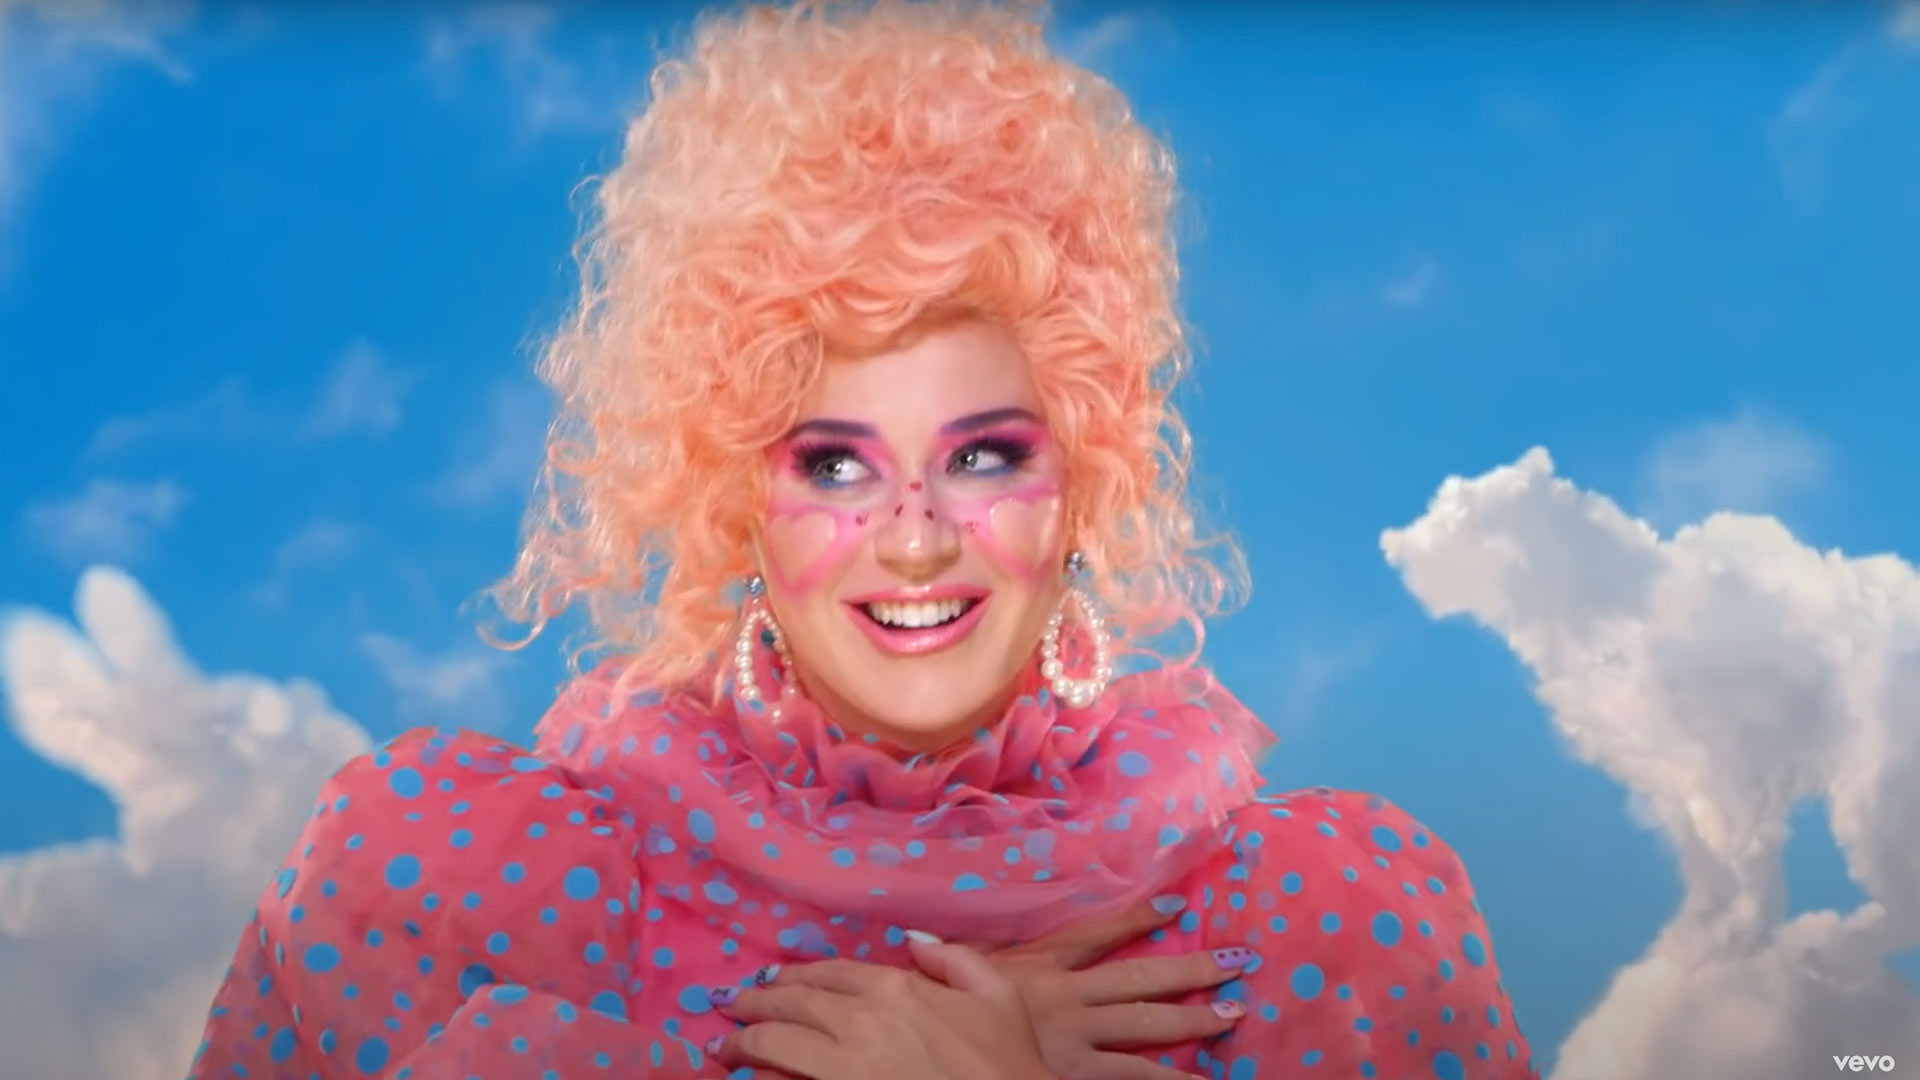 Pregnant Katy Perry Drops Gaming Themed Smile Music Video